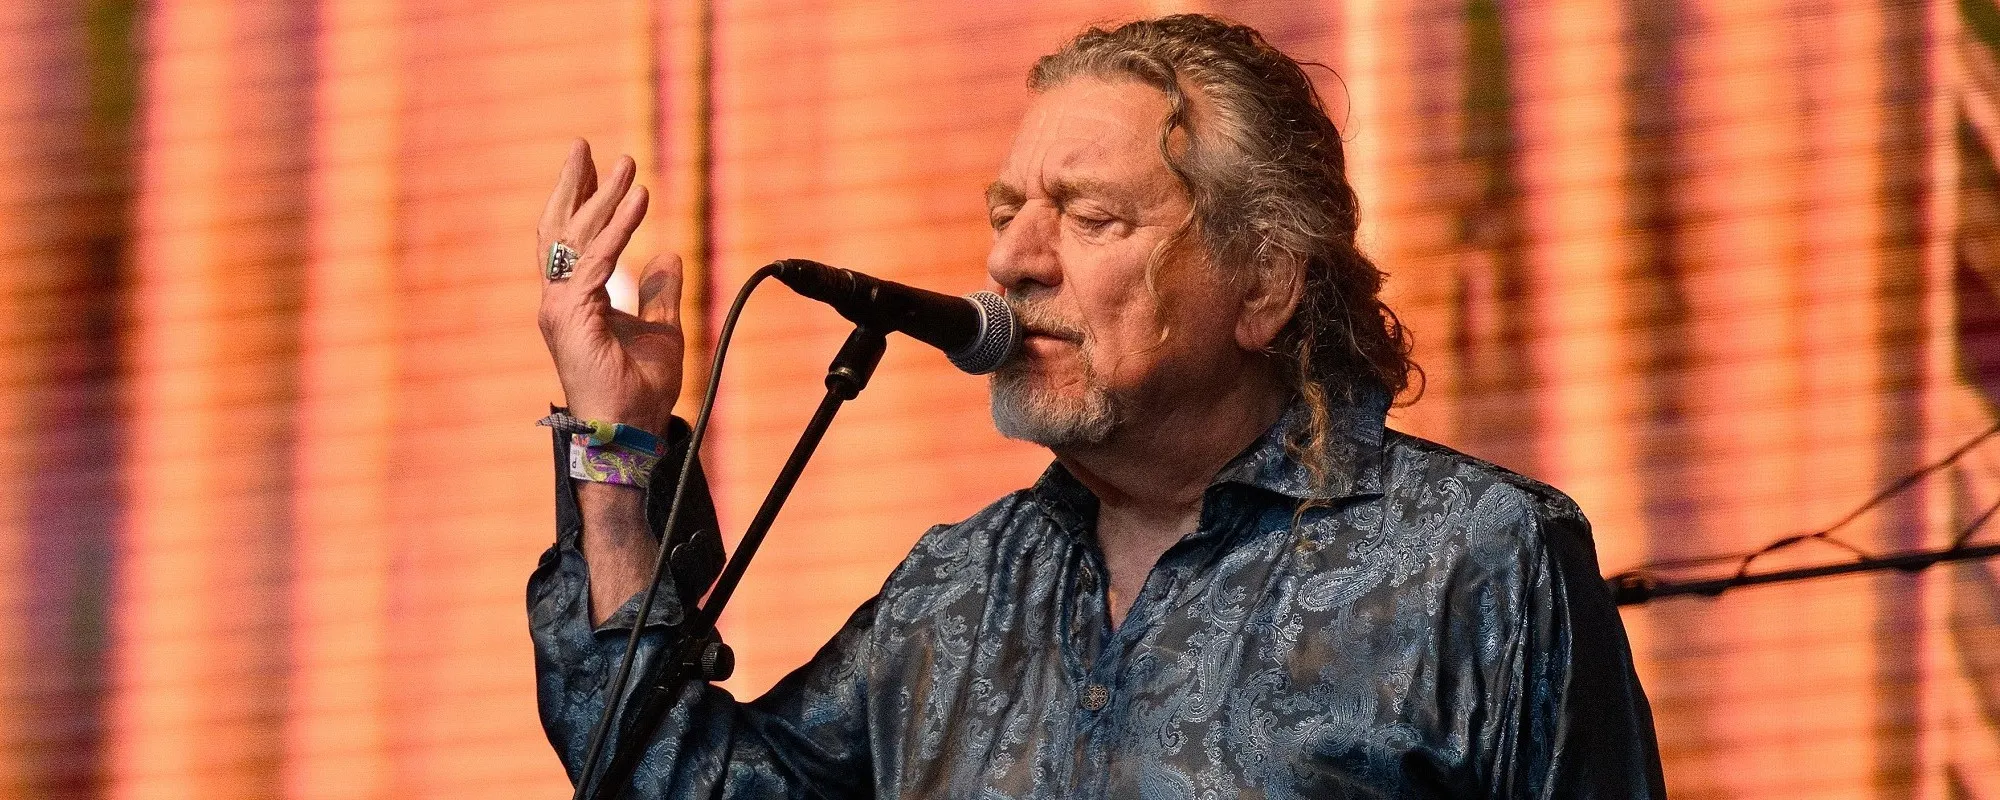 Robert Plant Rumored To Be Working on New Project Featuring Reimagined Versions of Led Zeppelin Songs